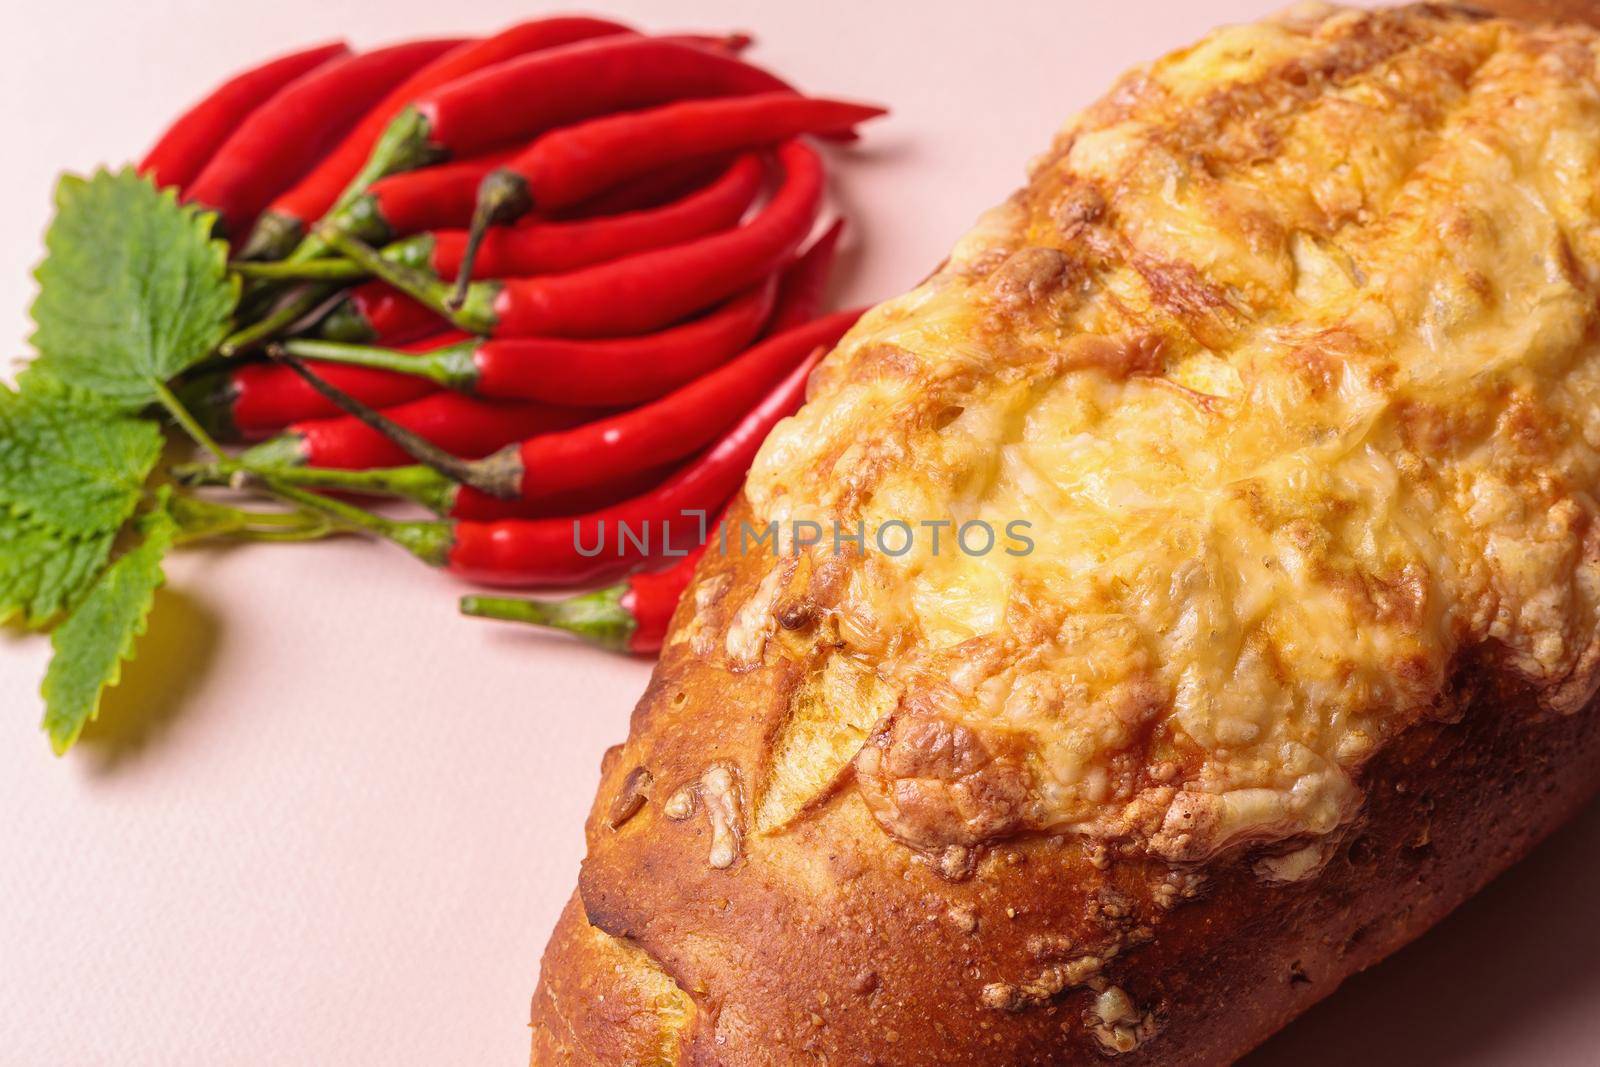 Slide of red chili peppers with green leaves and a loaf of bread. View from above.